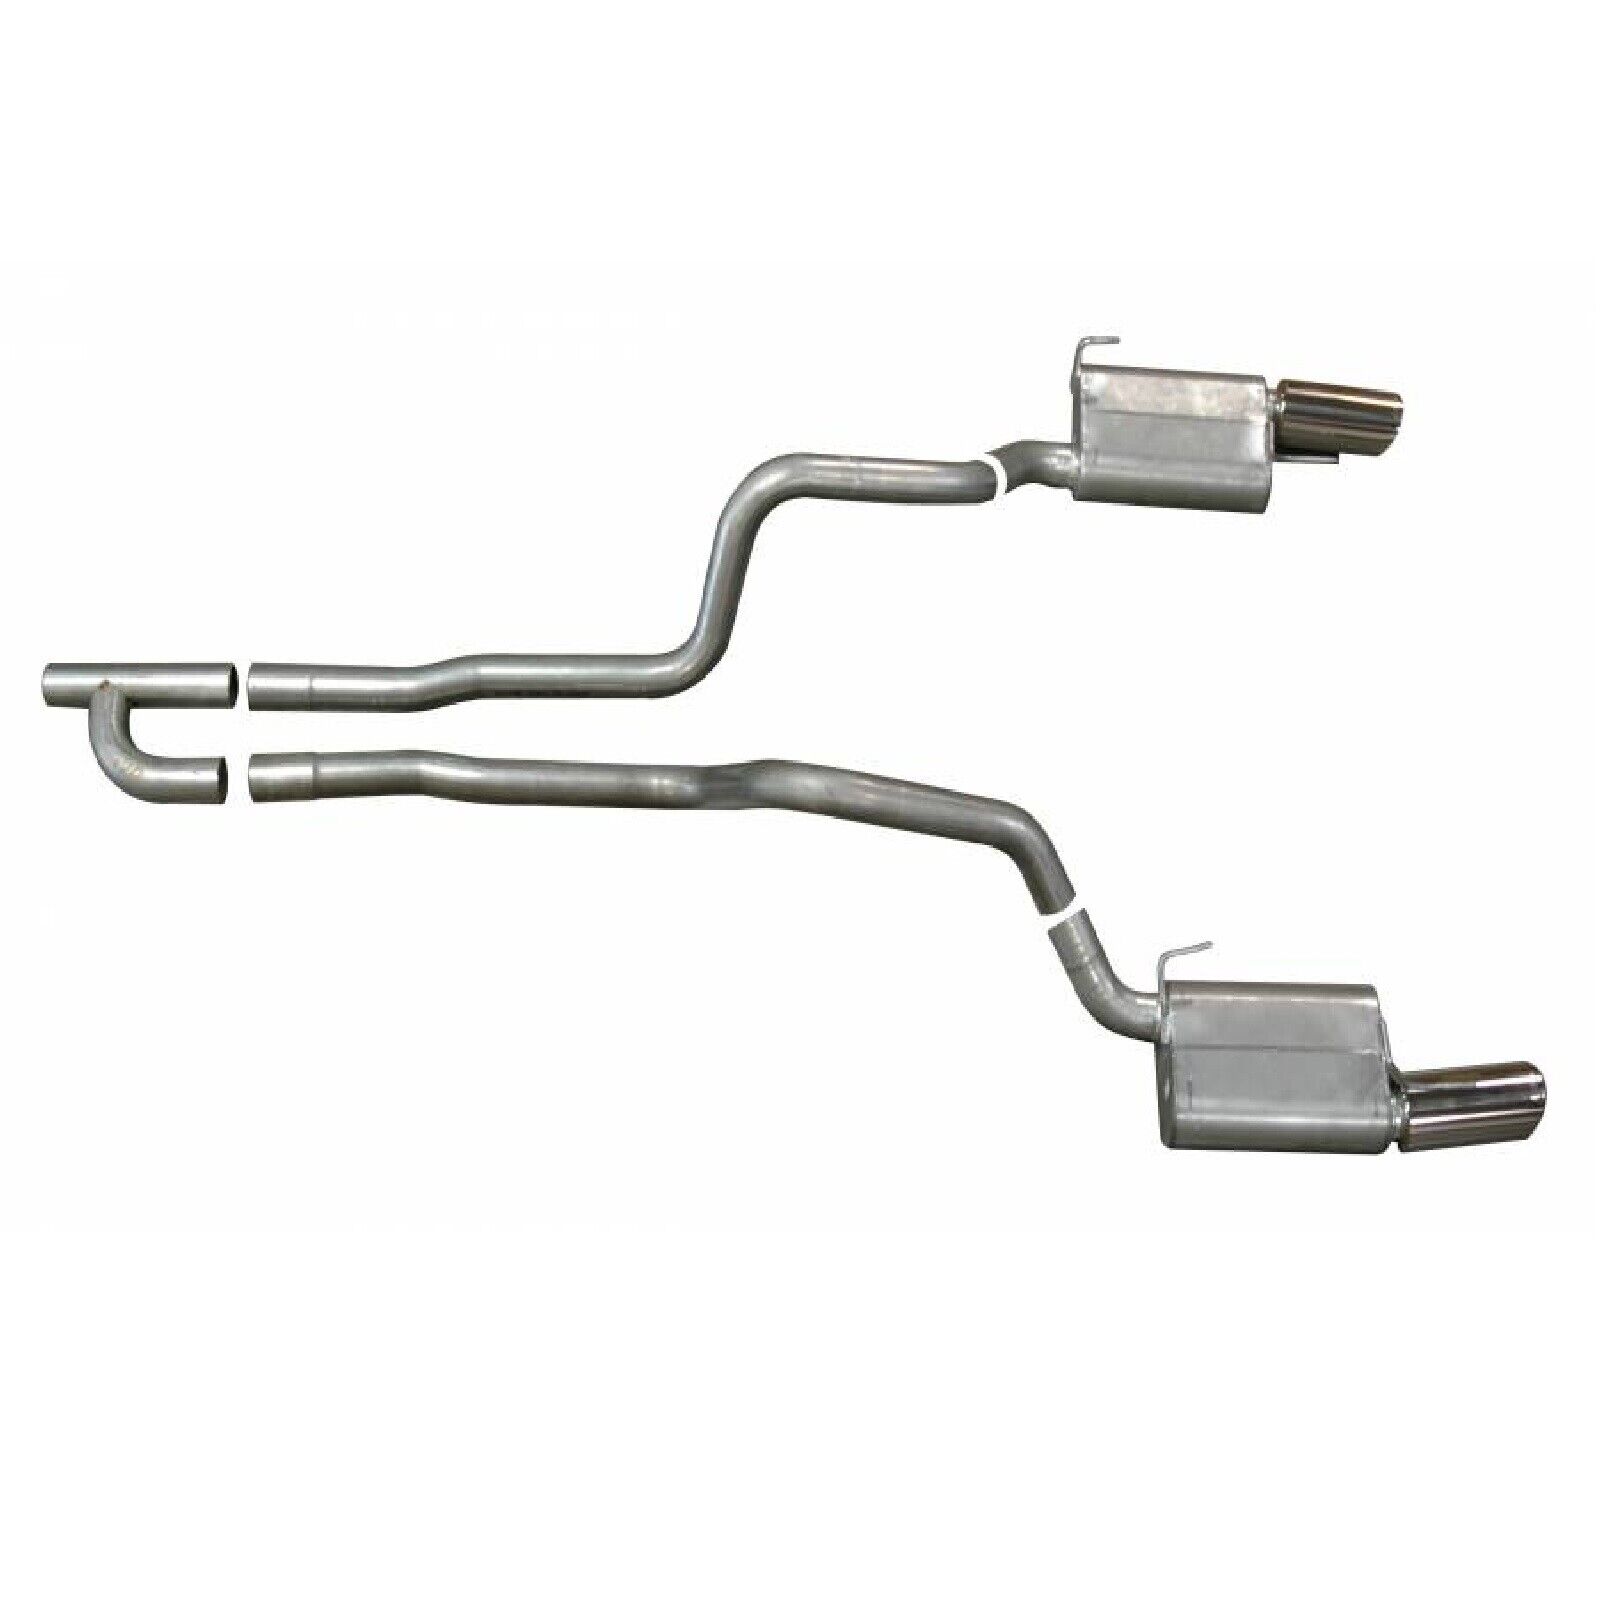 Gibson 319005 Aluminized Dual Exhaust System for 05-10 Mustang Base 4.0 Liters